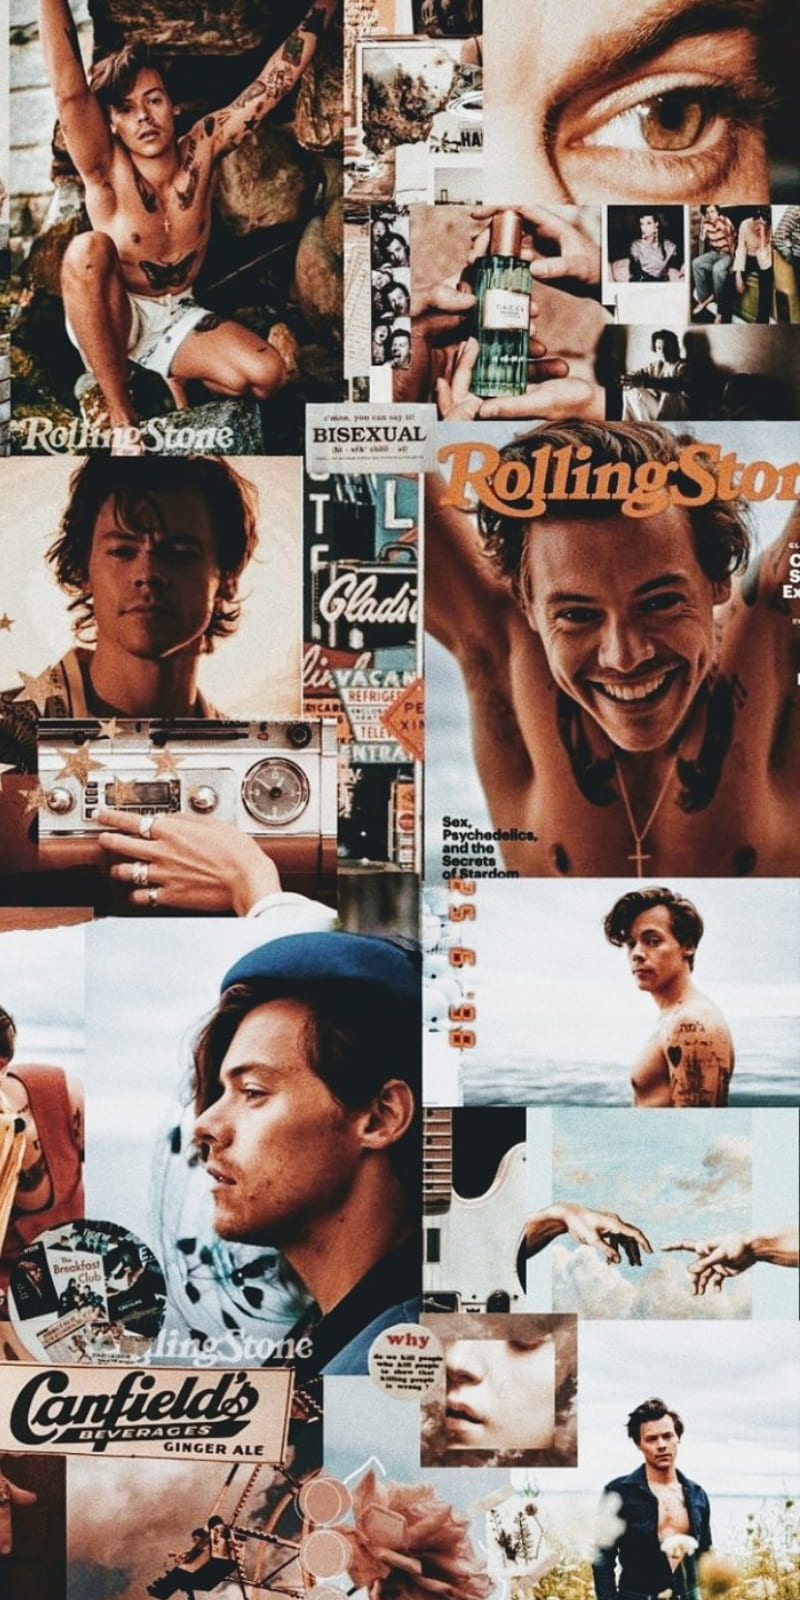 Harry Styles Collage Wallpaper